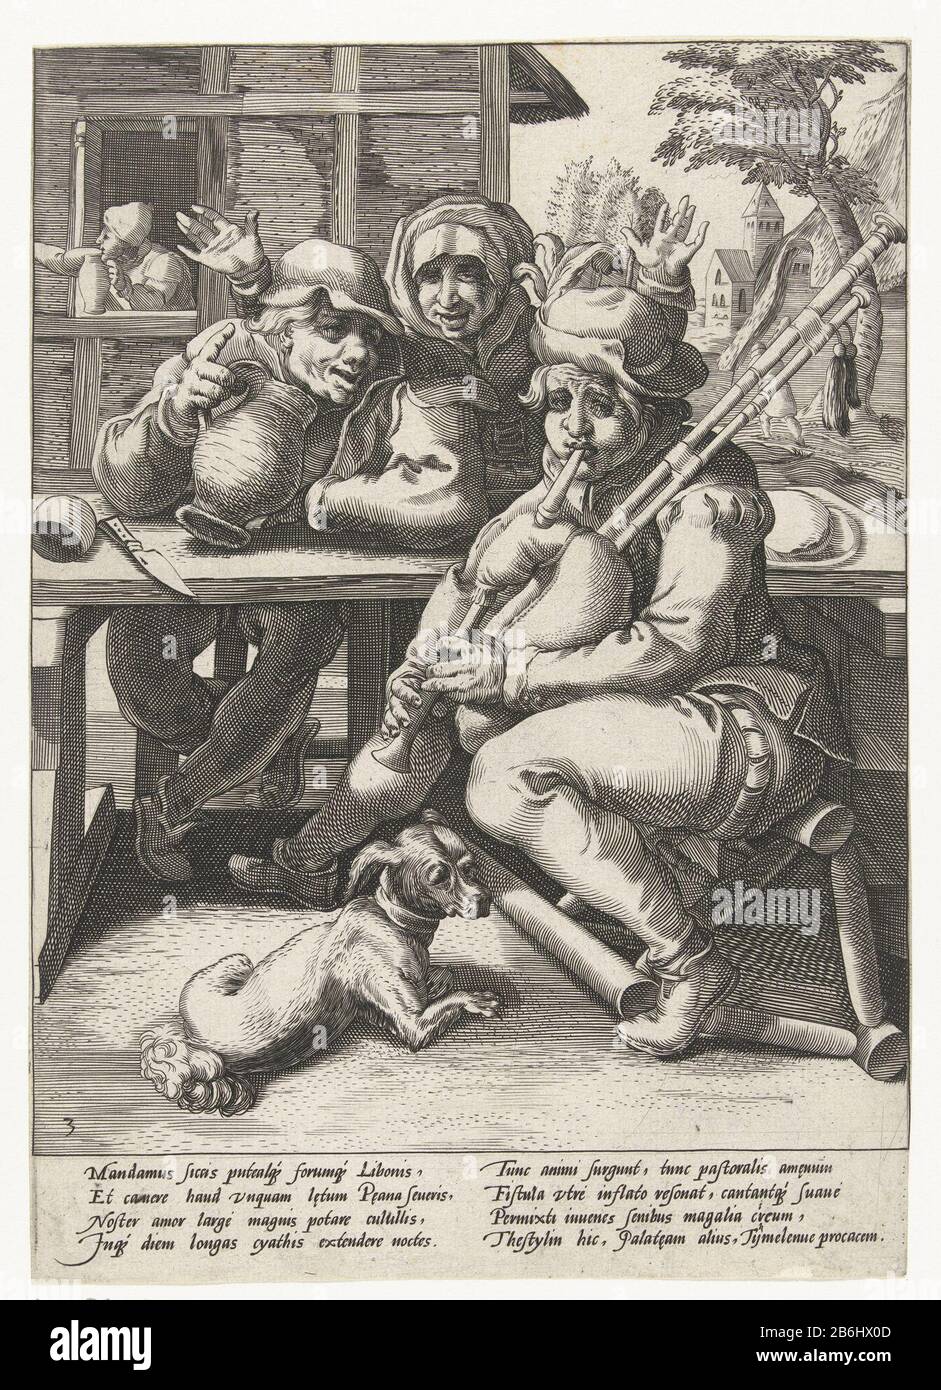 The bagpipe no sound, then he is full of the drinker and the piper Proverbs Karel van Mander (series title) a piper and a drunkard sit together. Behind the table, a woman raised her hands. The piper sitting on a fallen chair, sitting beside him a dog. Among the show an explanatory Latin verse Franco Estius. Manufacturer : printmaker: Hendrick Goltzius (attributed to studio), designed by Karel van Mander (I) author: Franco EstiusPlaats manufacture Haarlem Dating: 1590 - 1594 Physical features: car material: paper Technique : engra (printing process) Dimensions: sheet: h 243 mm × W 170 mmToelich Stock Photo